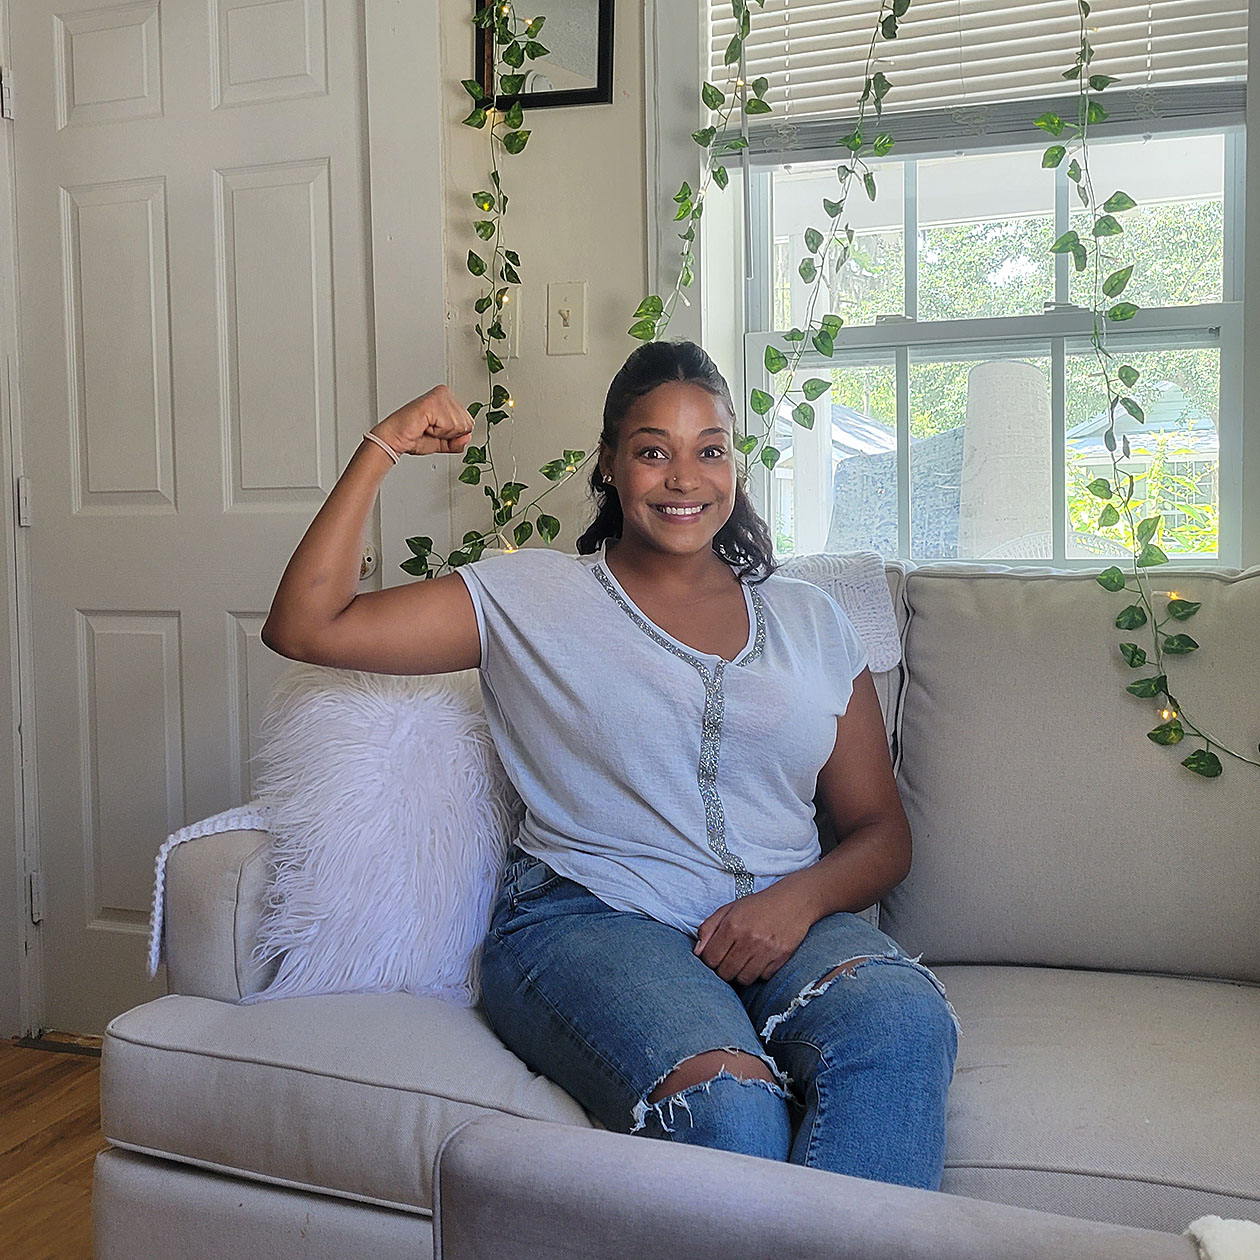 Safae flexing her arm muscle to show the strength she's demonstrated in acquiring permanent housing